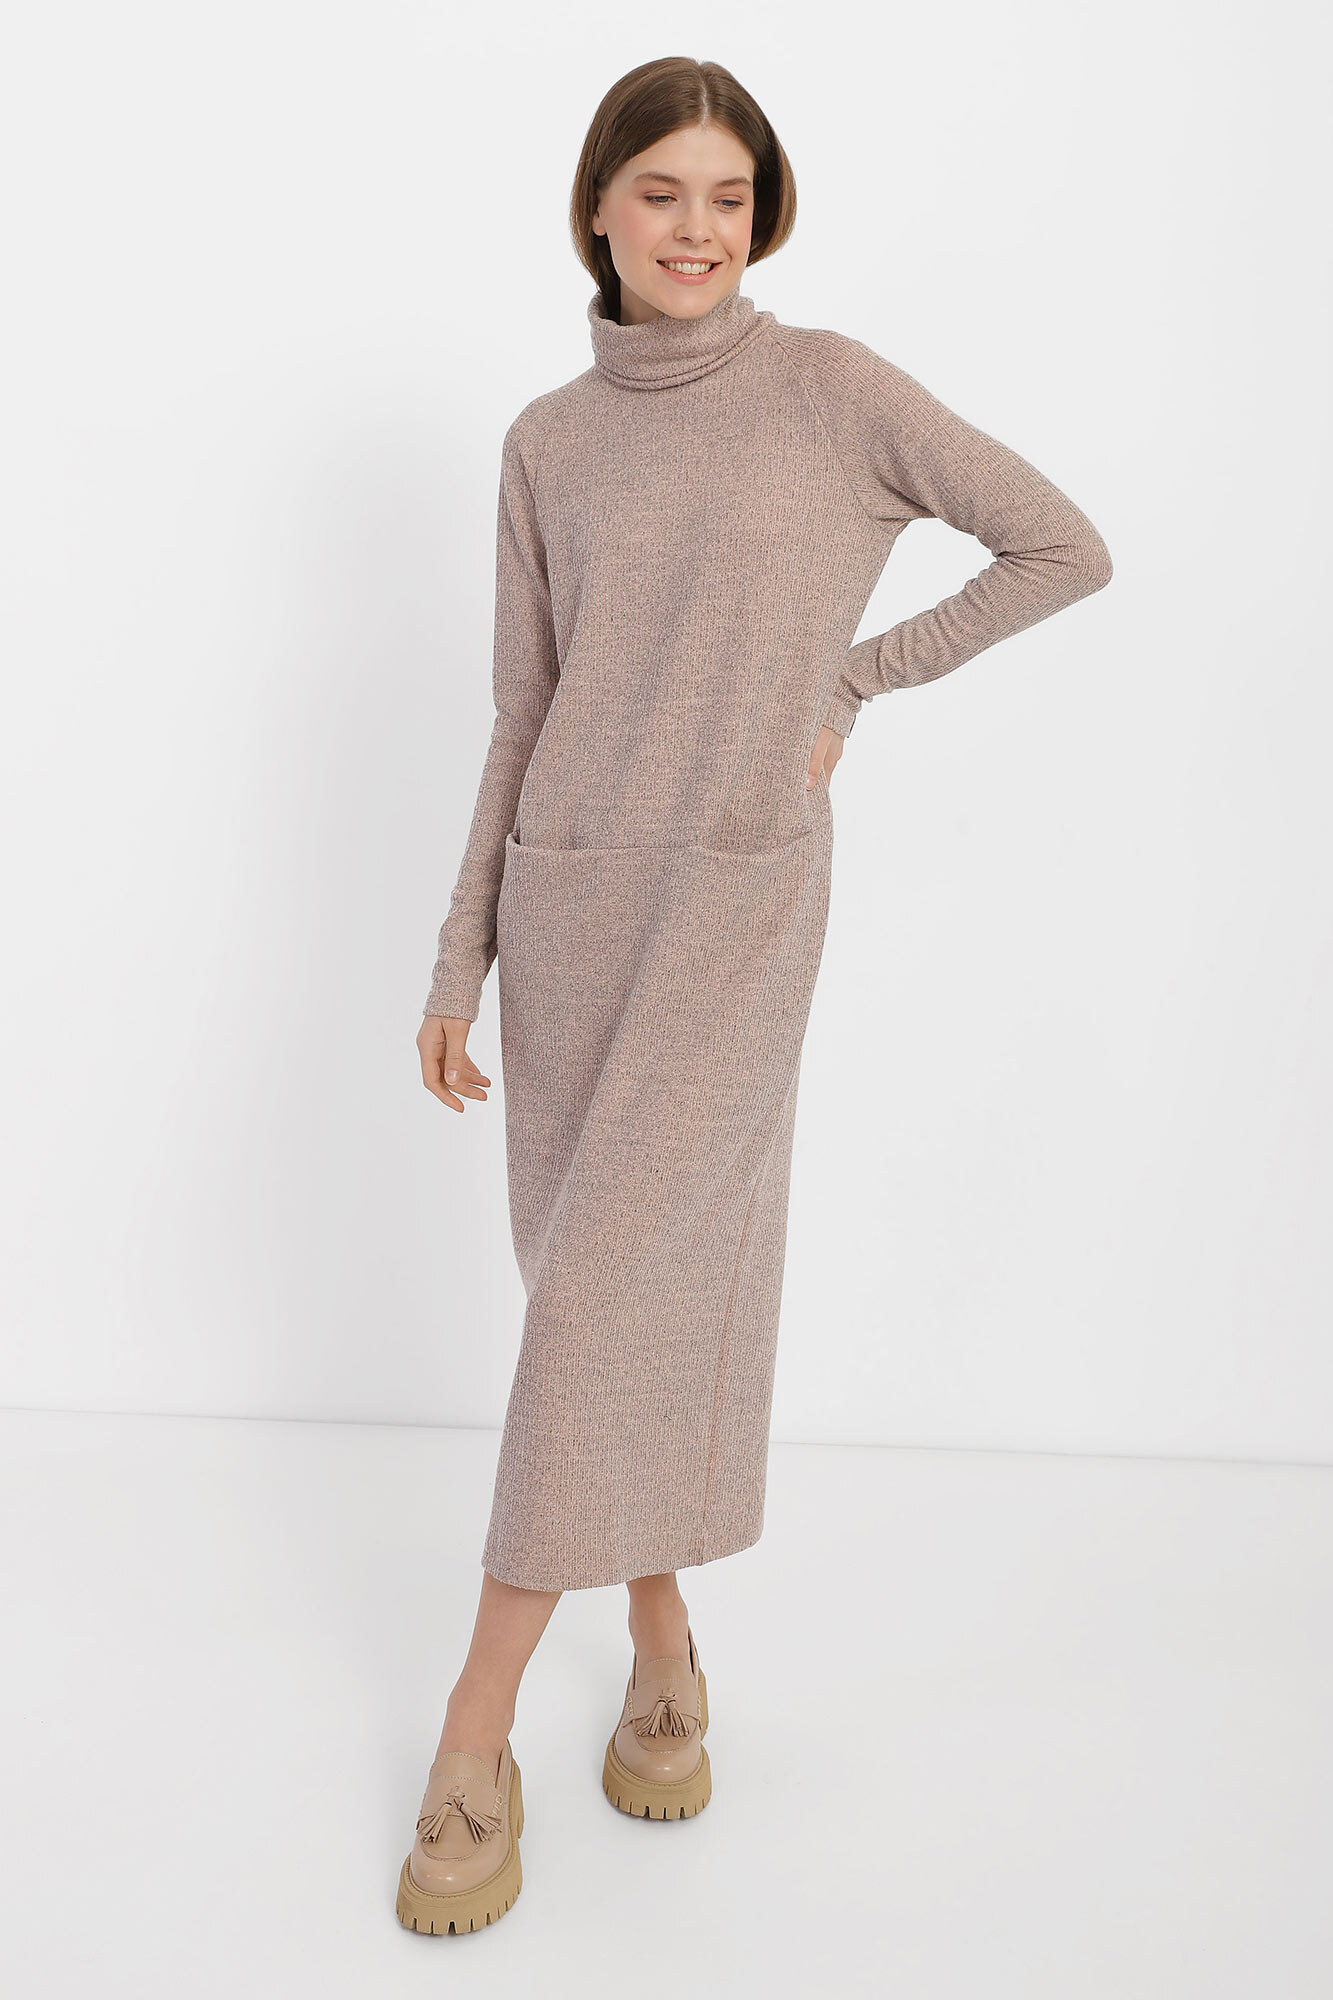 BESSI long knitted dress stand-up collar Garne 3040270 buy at the price UAH. in the online store Garne | sizes and colors. 🚚Delivery across Ukraine.